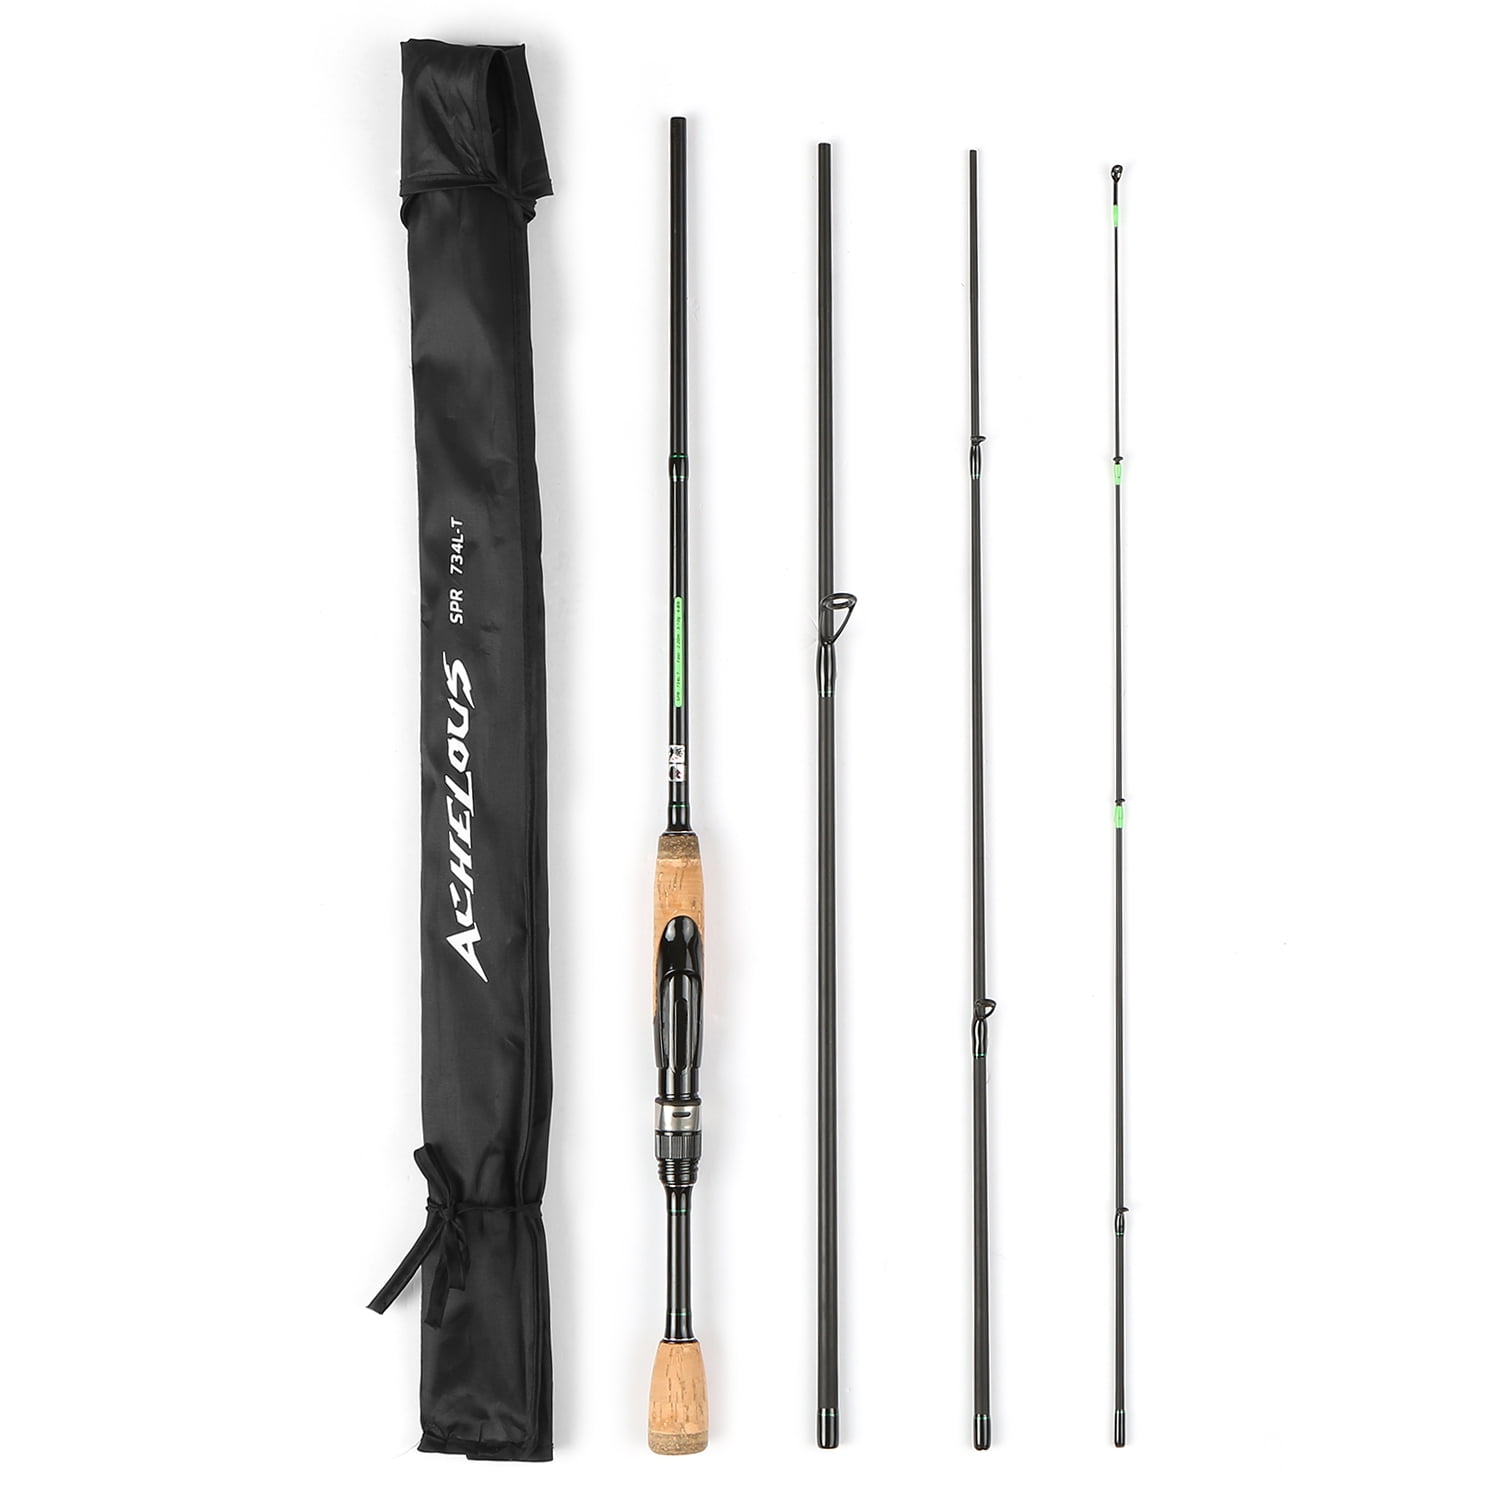 Freshwater Retractable 7 Sections Slim Telescopic Fishing Rod Pole 1.9M Length 